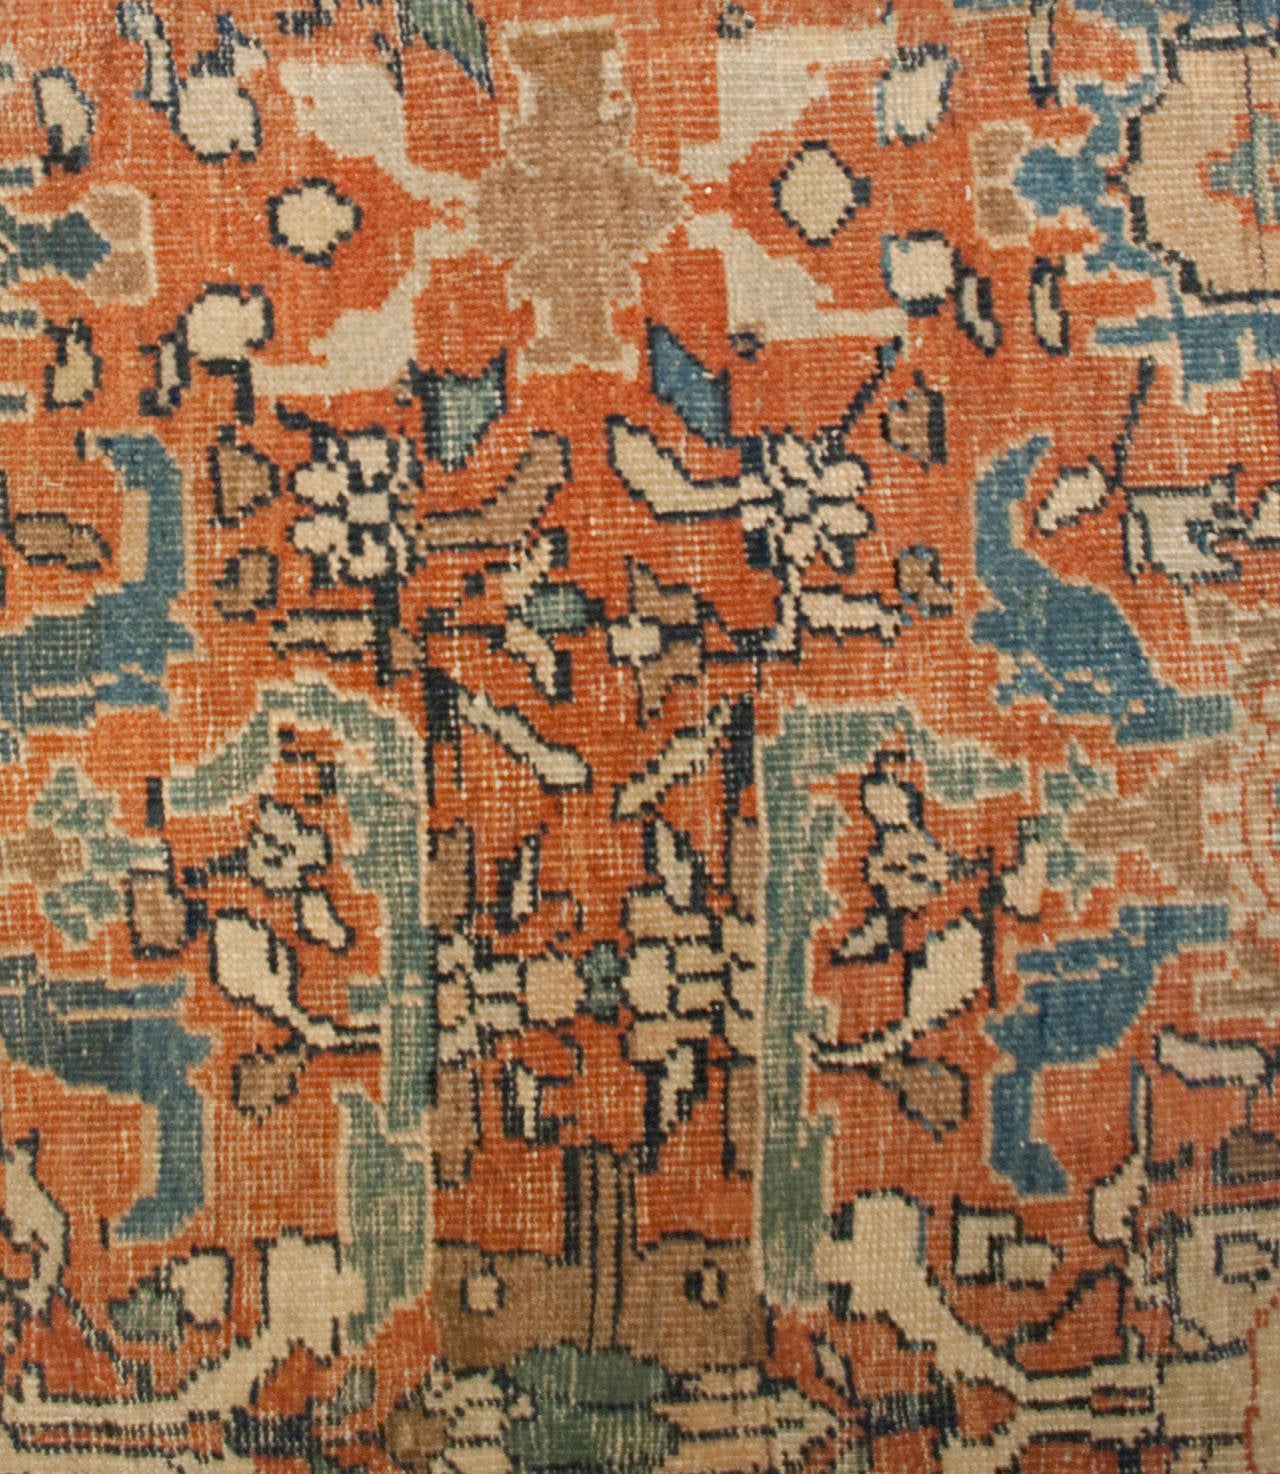 A late 19th century Persian Sultanabad rug with an absolutely beautiful large-scale Primitive floral pattern on a rust orange background, surrounded by a wide indigo border with large floral pattern.